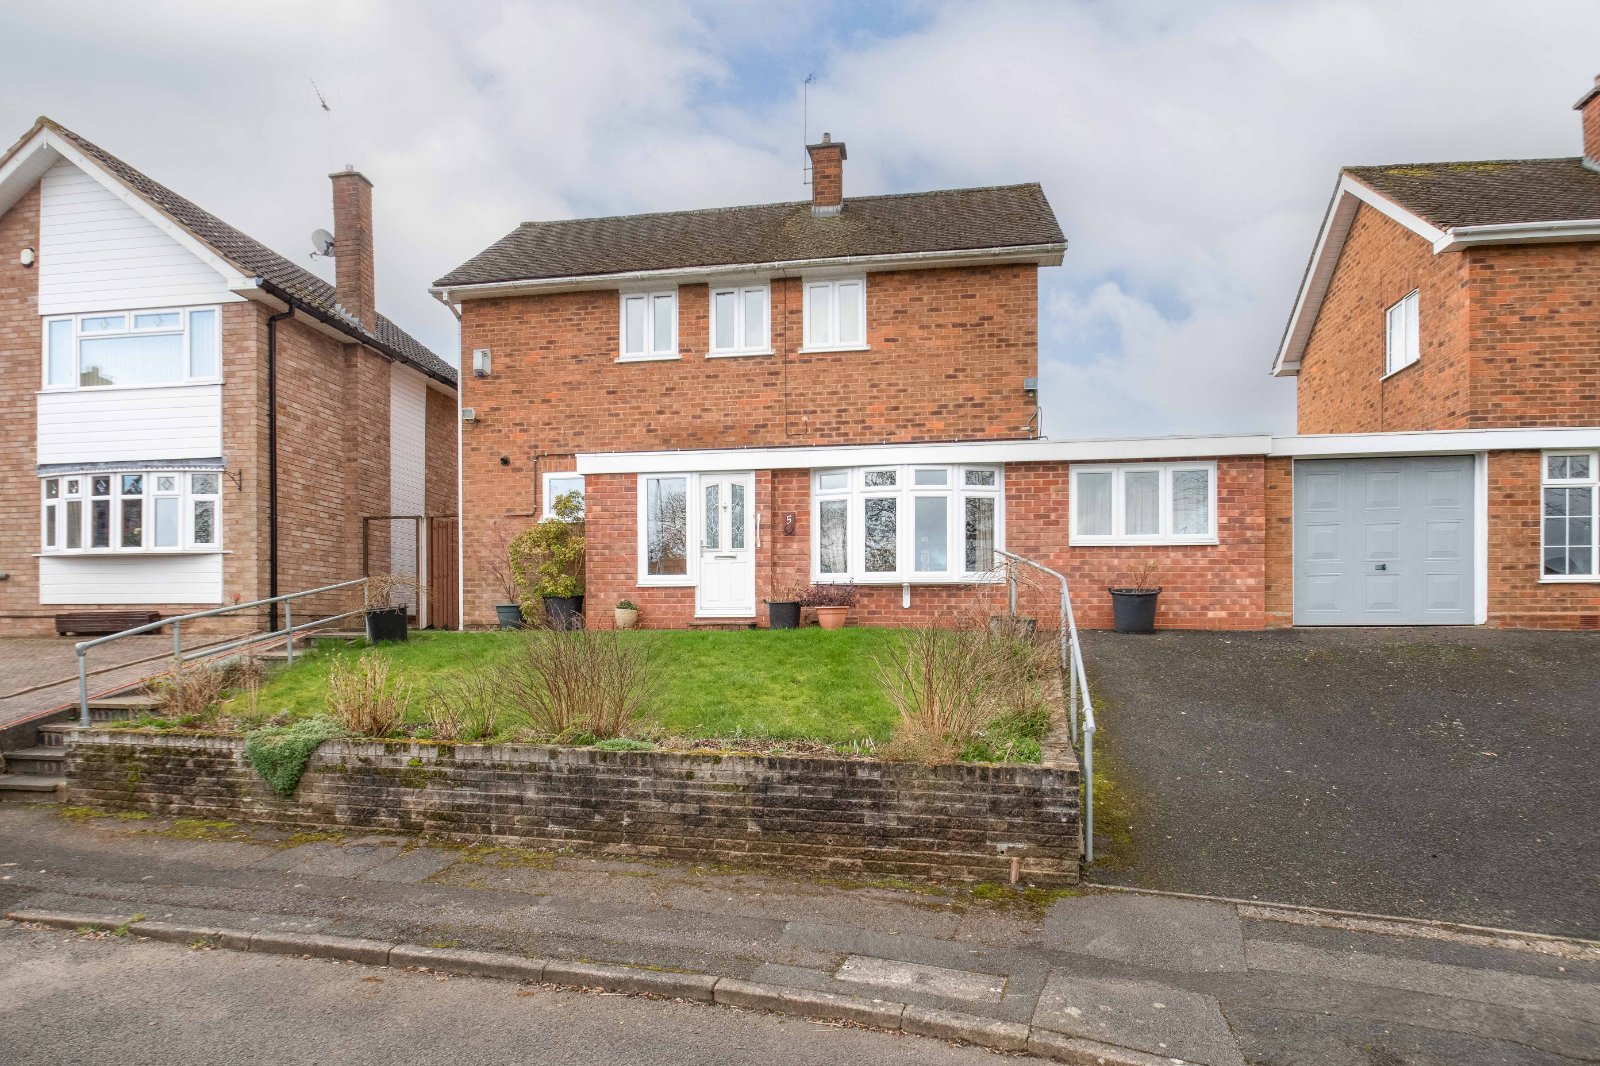 3 bed house for sale in Park Court, Redditch - Property Image 1